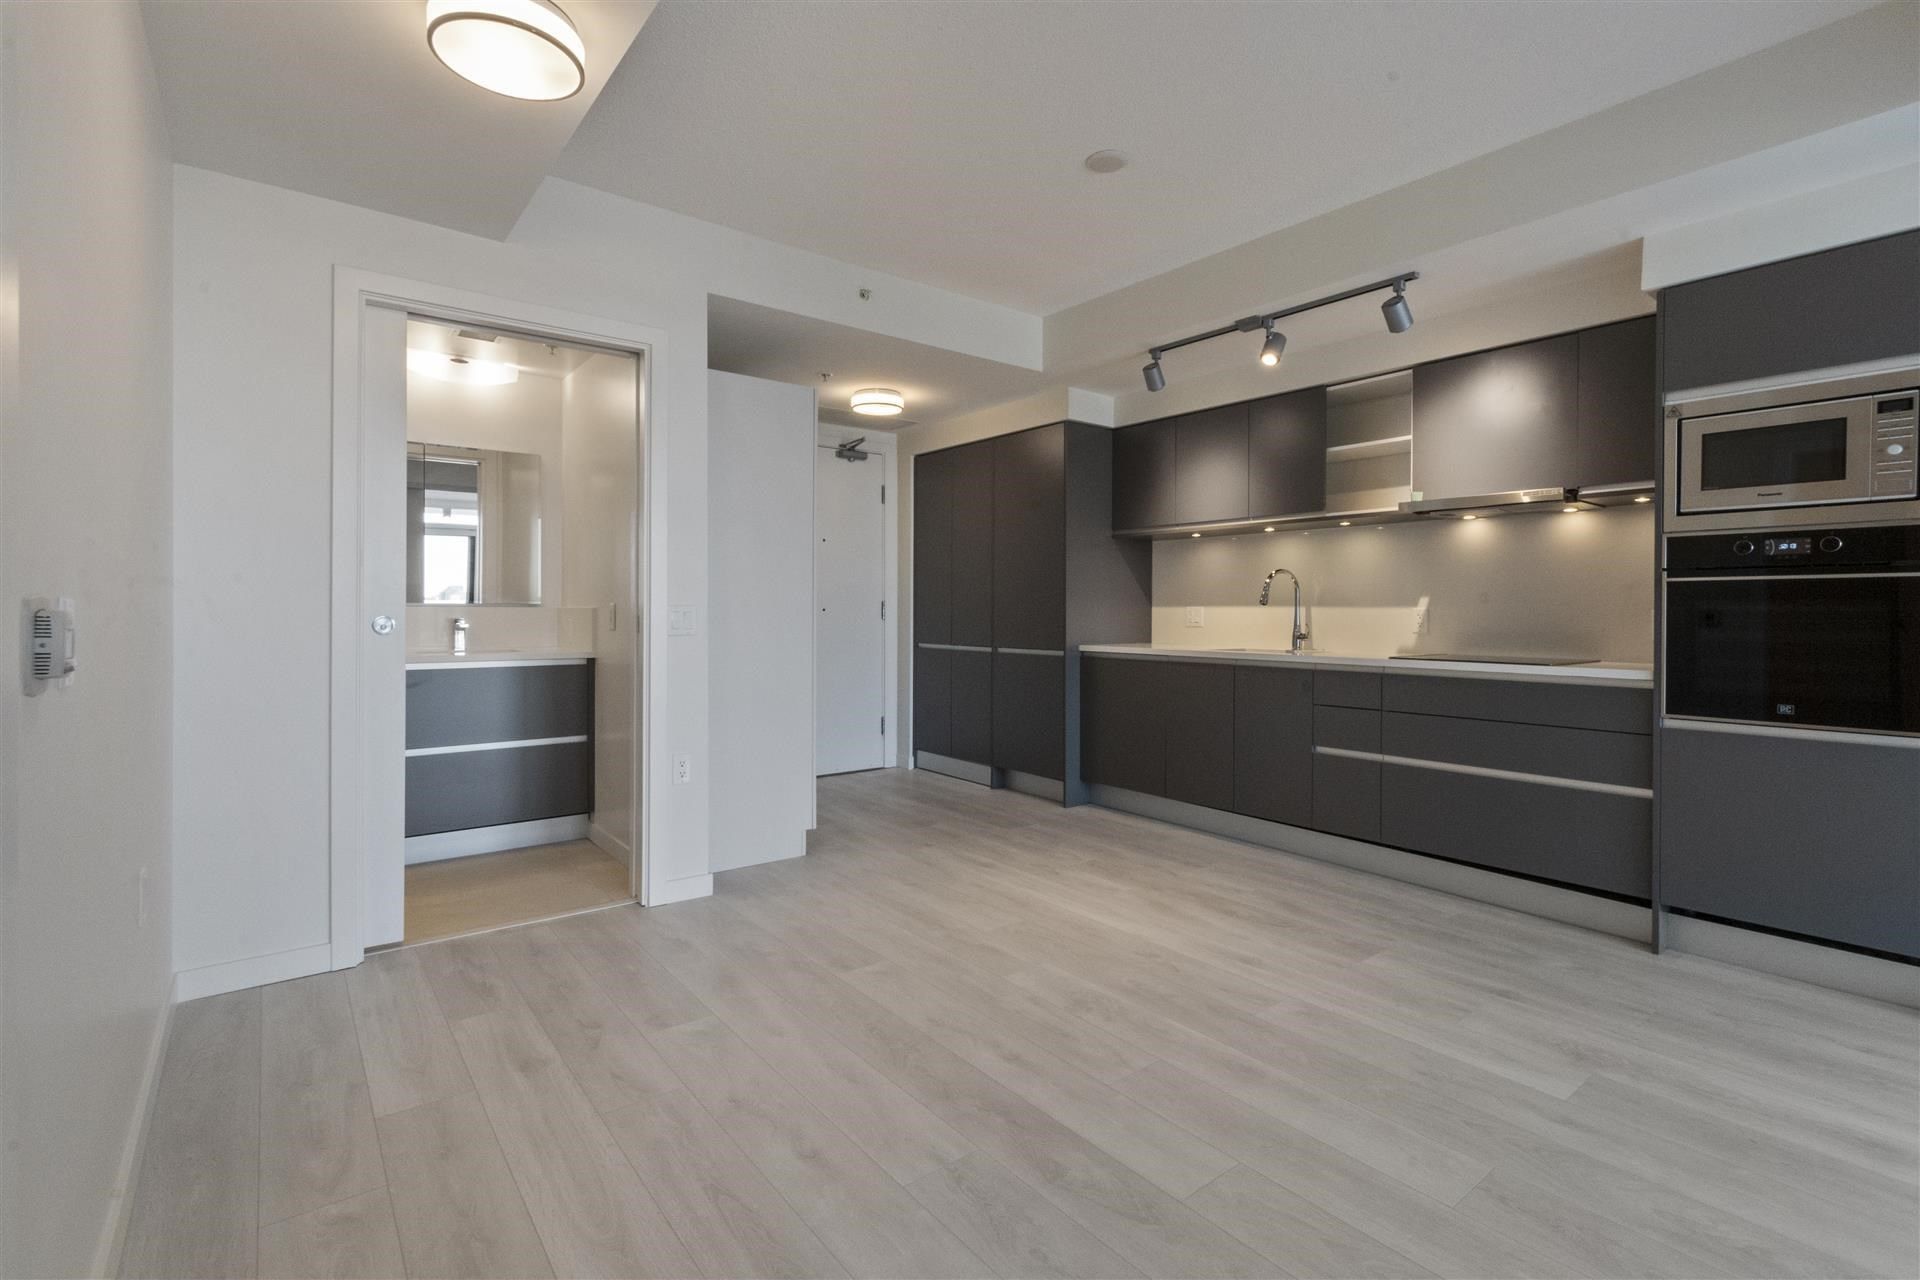 Main Photo: 1118 180 E 2ND Avenue in Vancouver: Mount Pleasant VE Condo for sale (Vancouver East)  : MLS®# R2600602